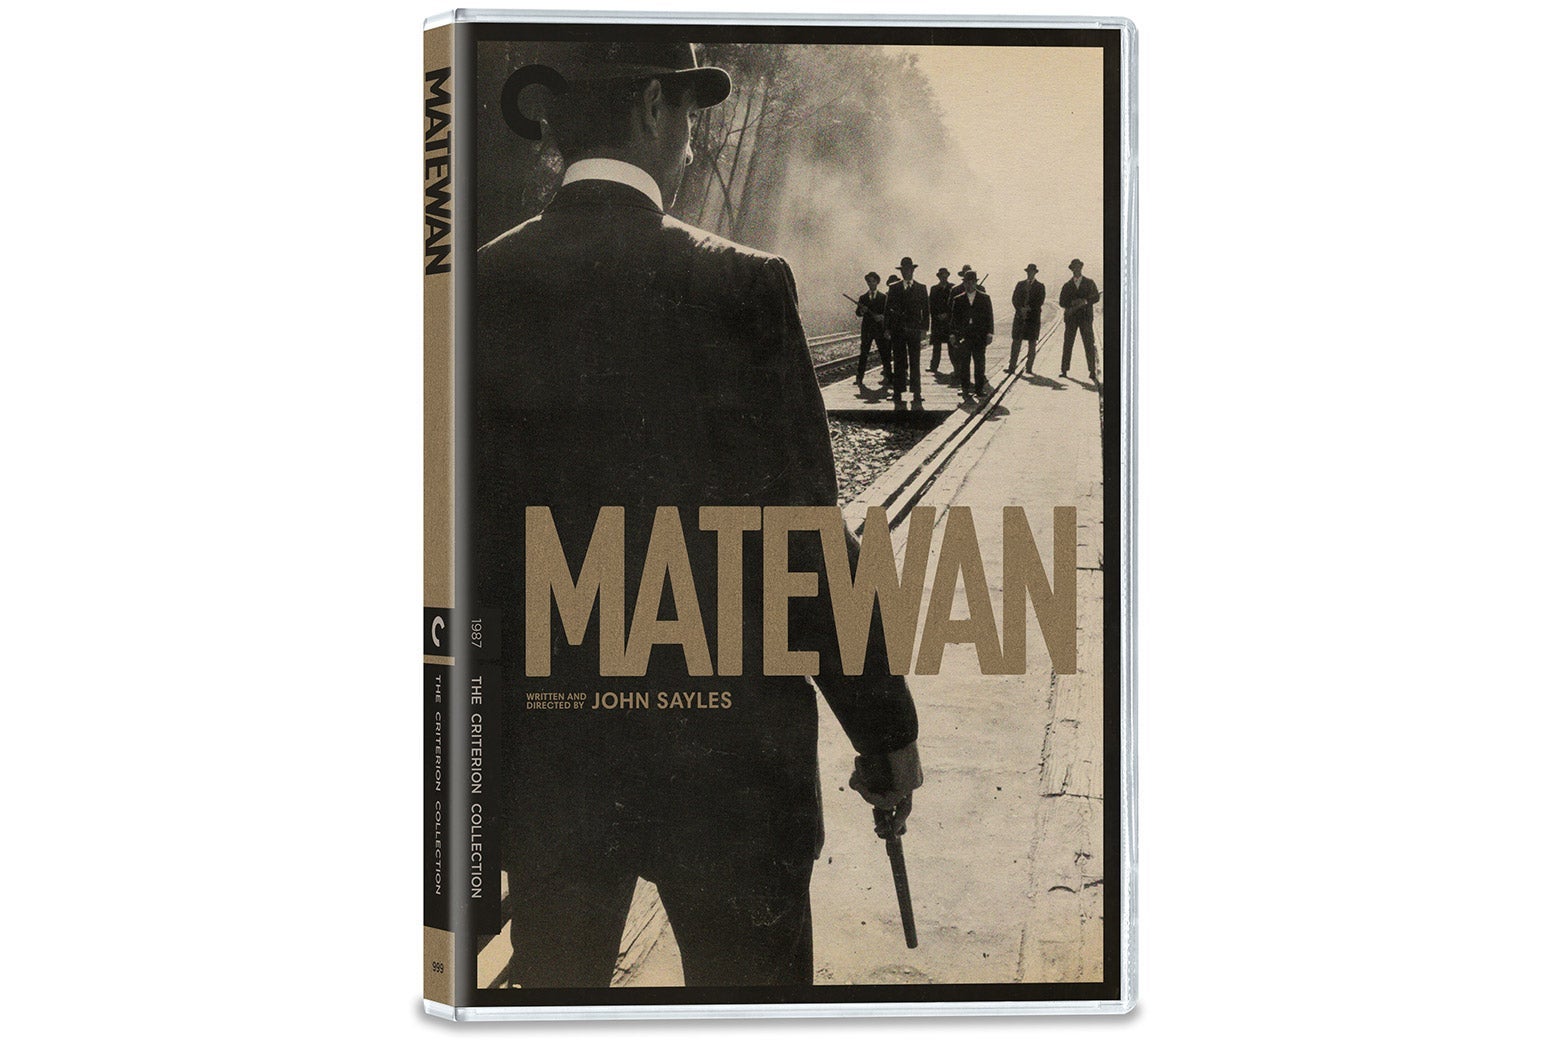 The cover of Matewan.